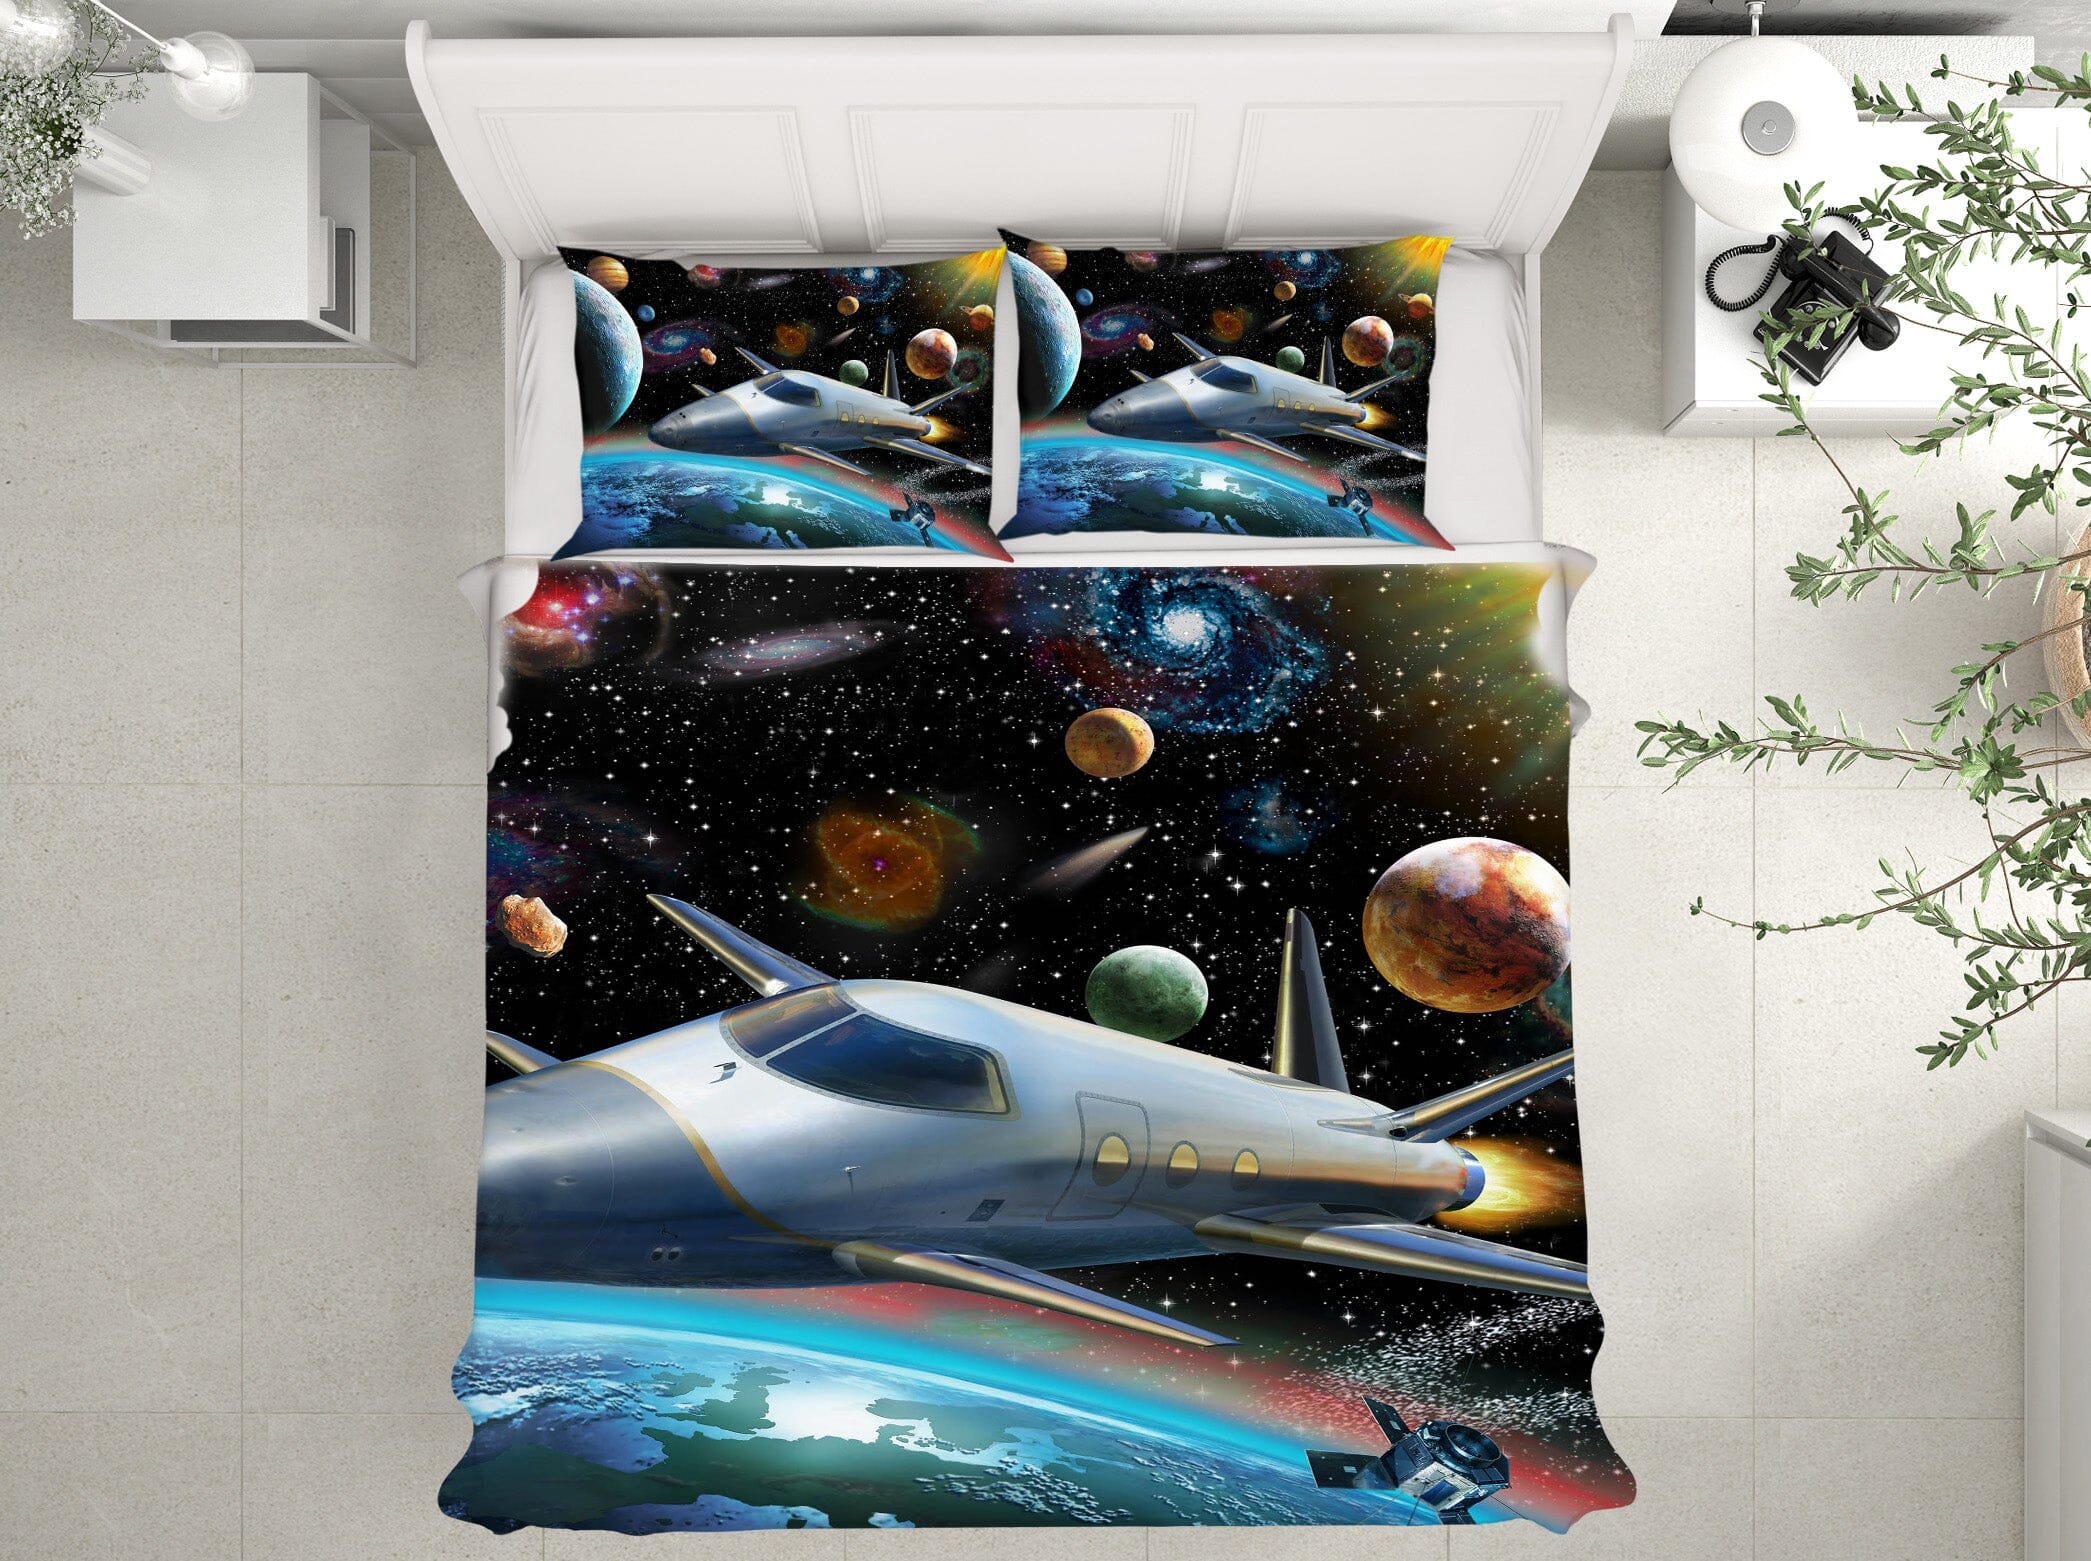 3D Starry Spaceship 2125 Adrian Chesterman Bedding Bed Pillowcases Quilt Quiet Covers AJ Creativity Home 